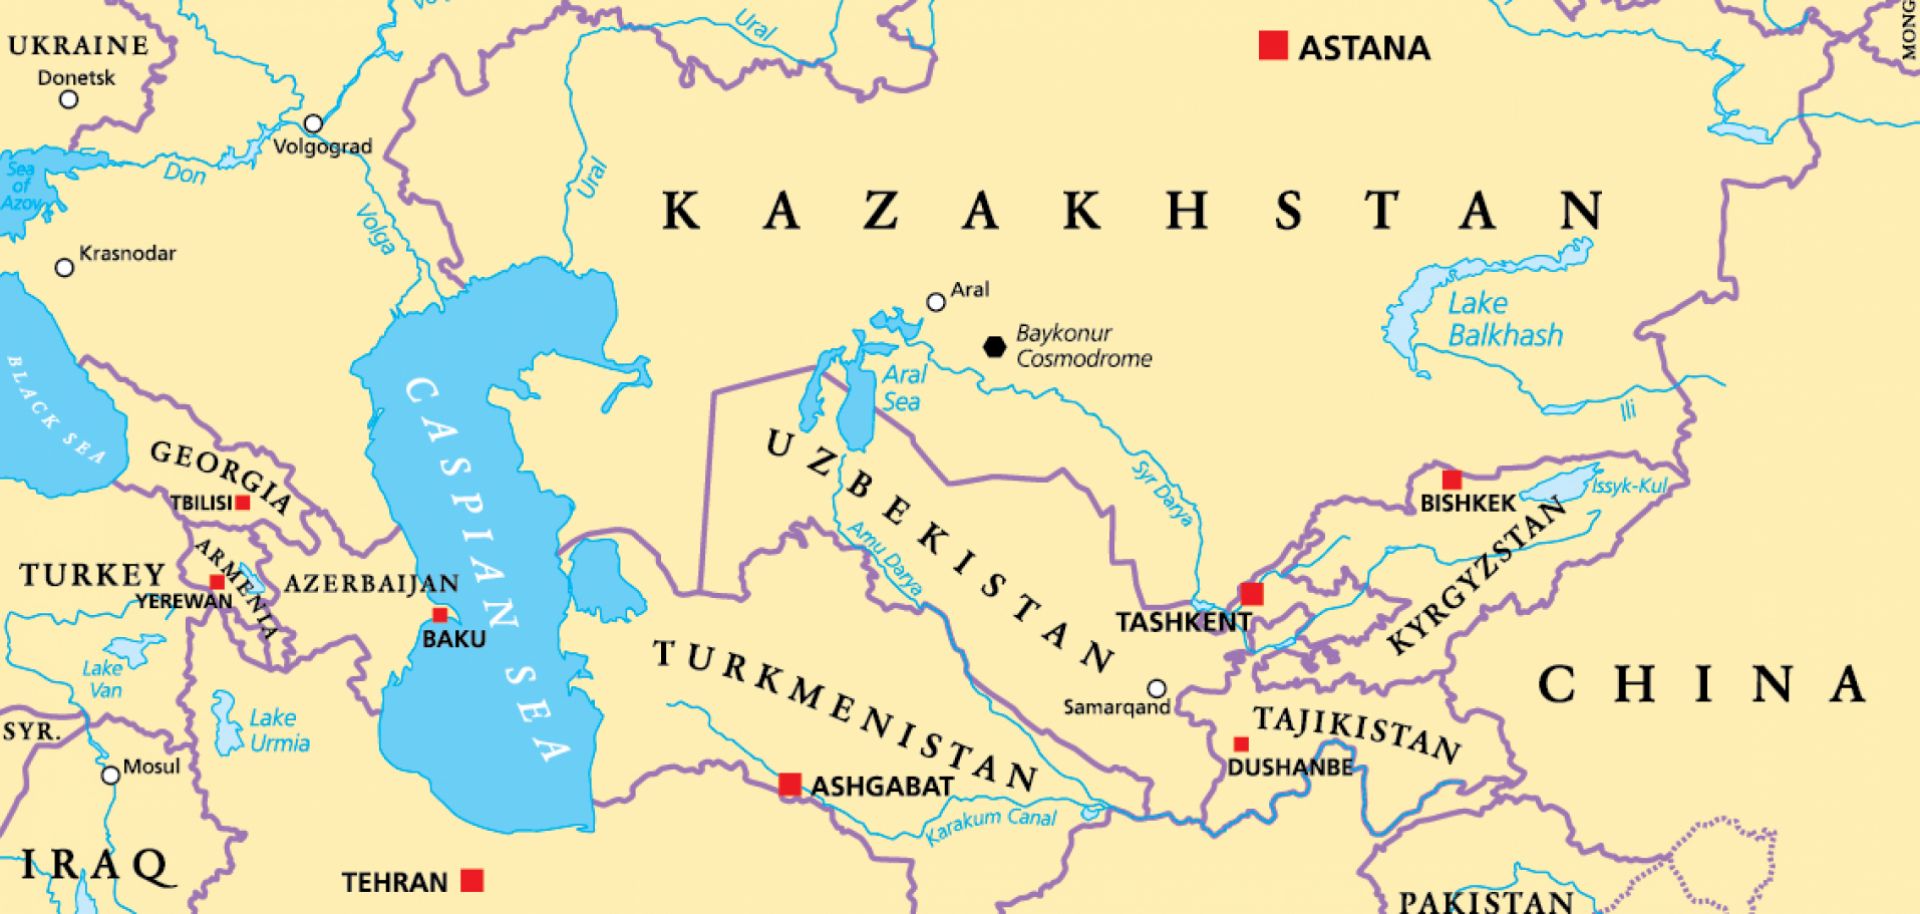 A political map of the Caucasus and Central Asia.